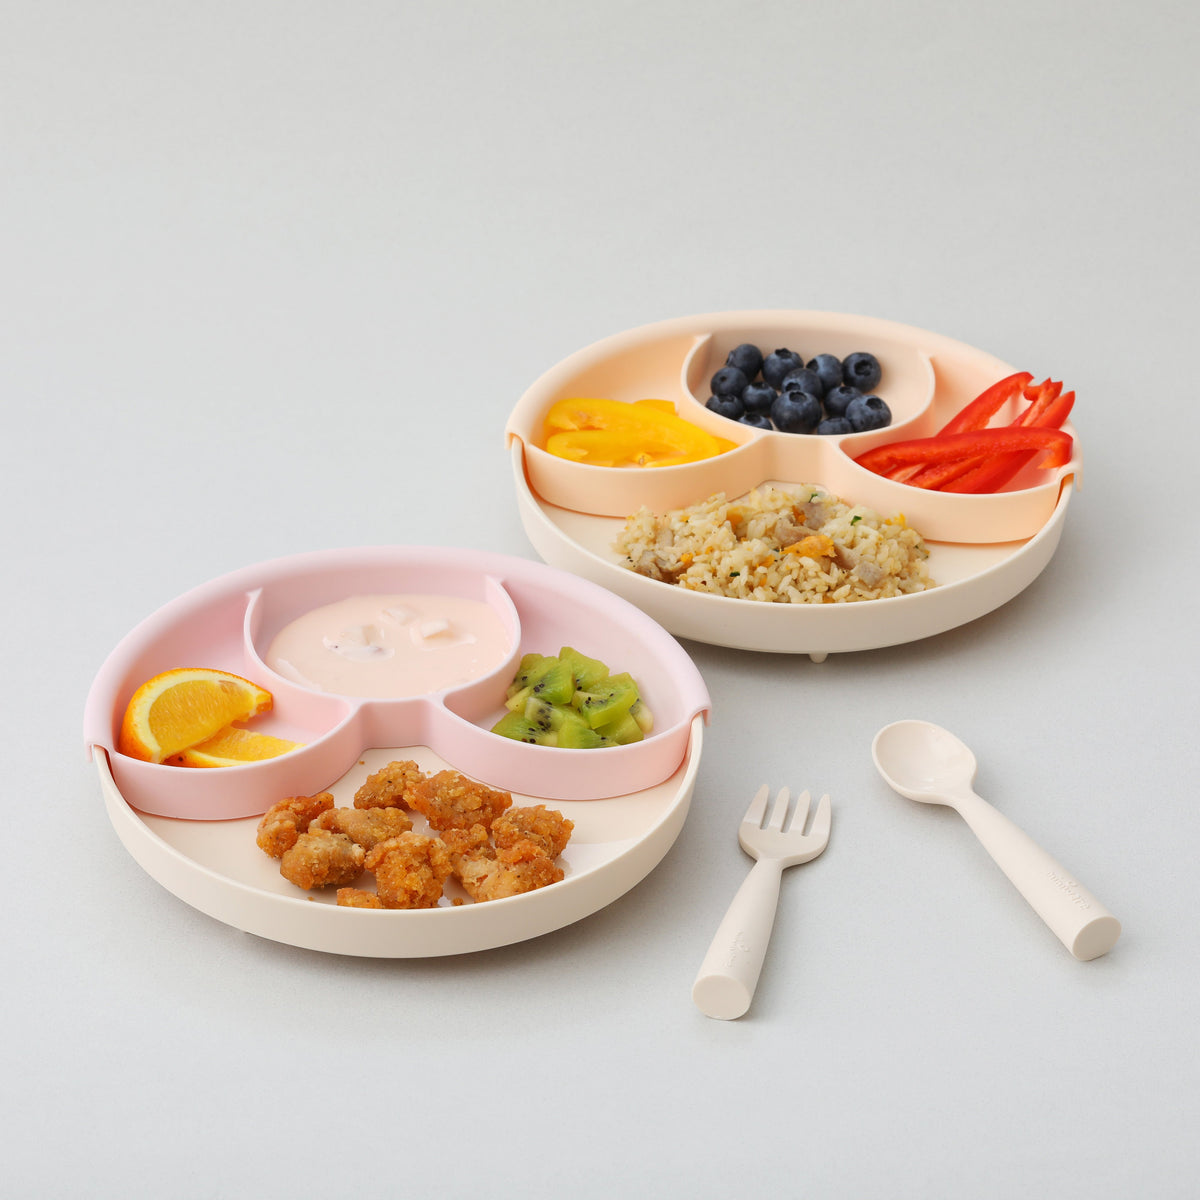 miniware-healthy-meal-set-pla-smart-divider-suction-plate-in-vanilla-+-silicone-divider-in-peach- (15)